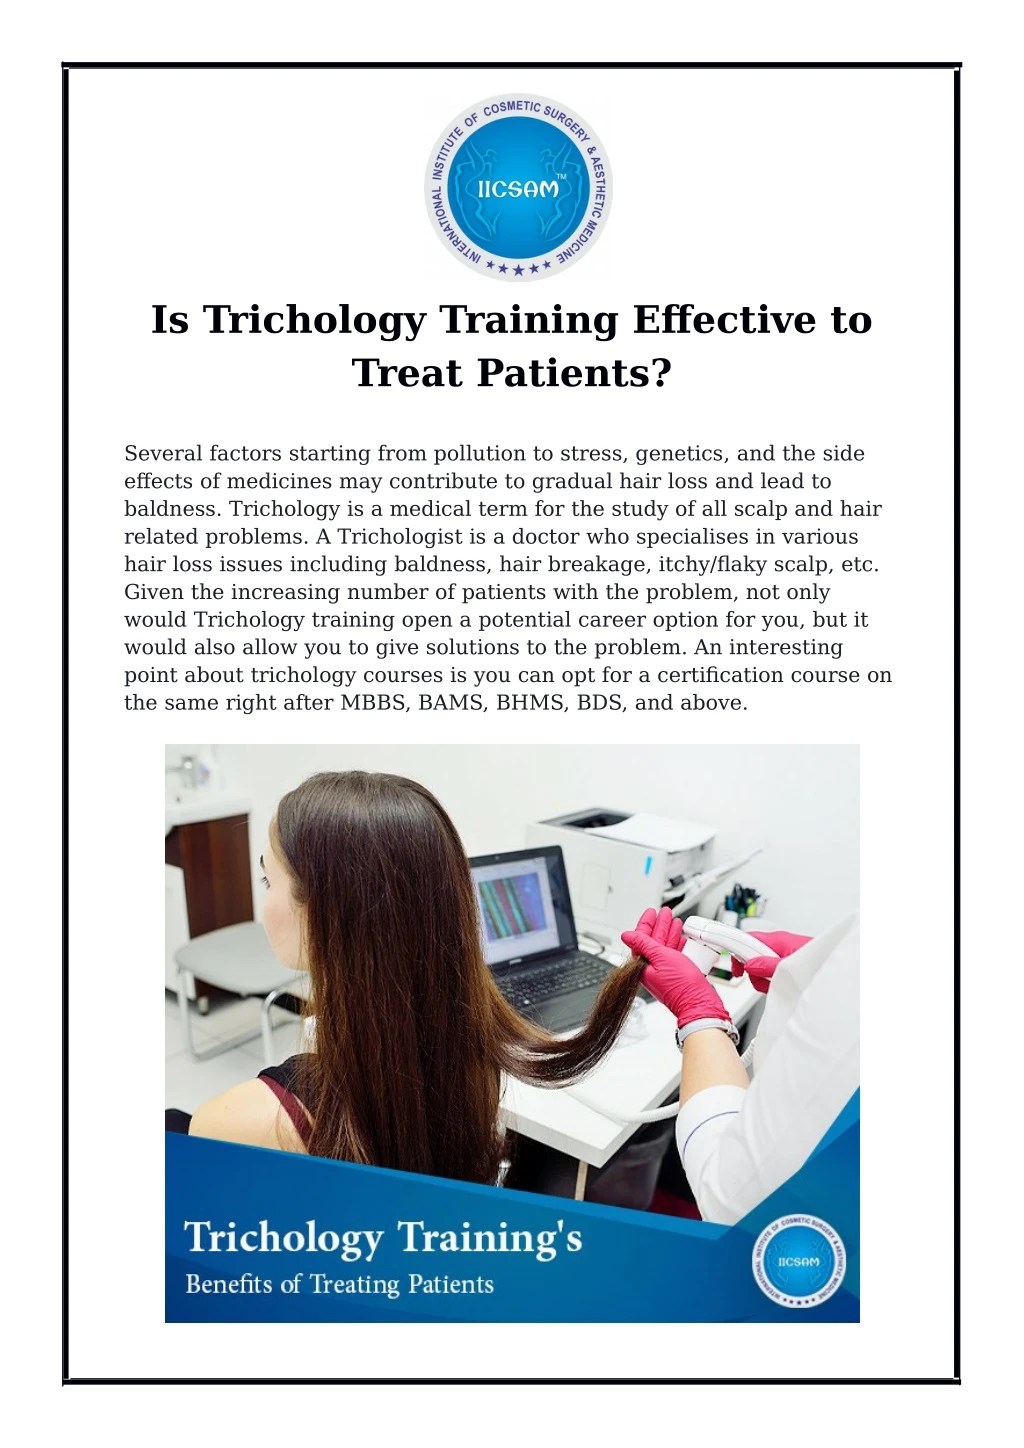 is trichology training effective to treat patients